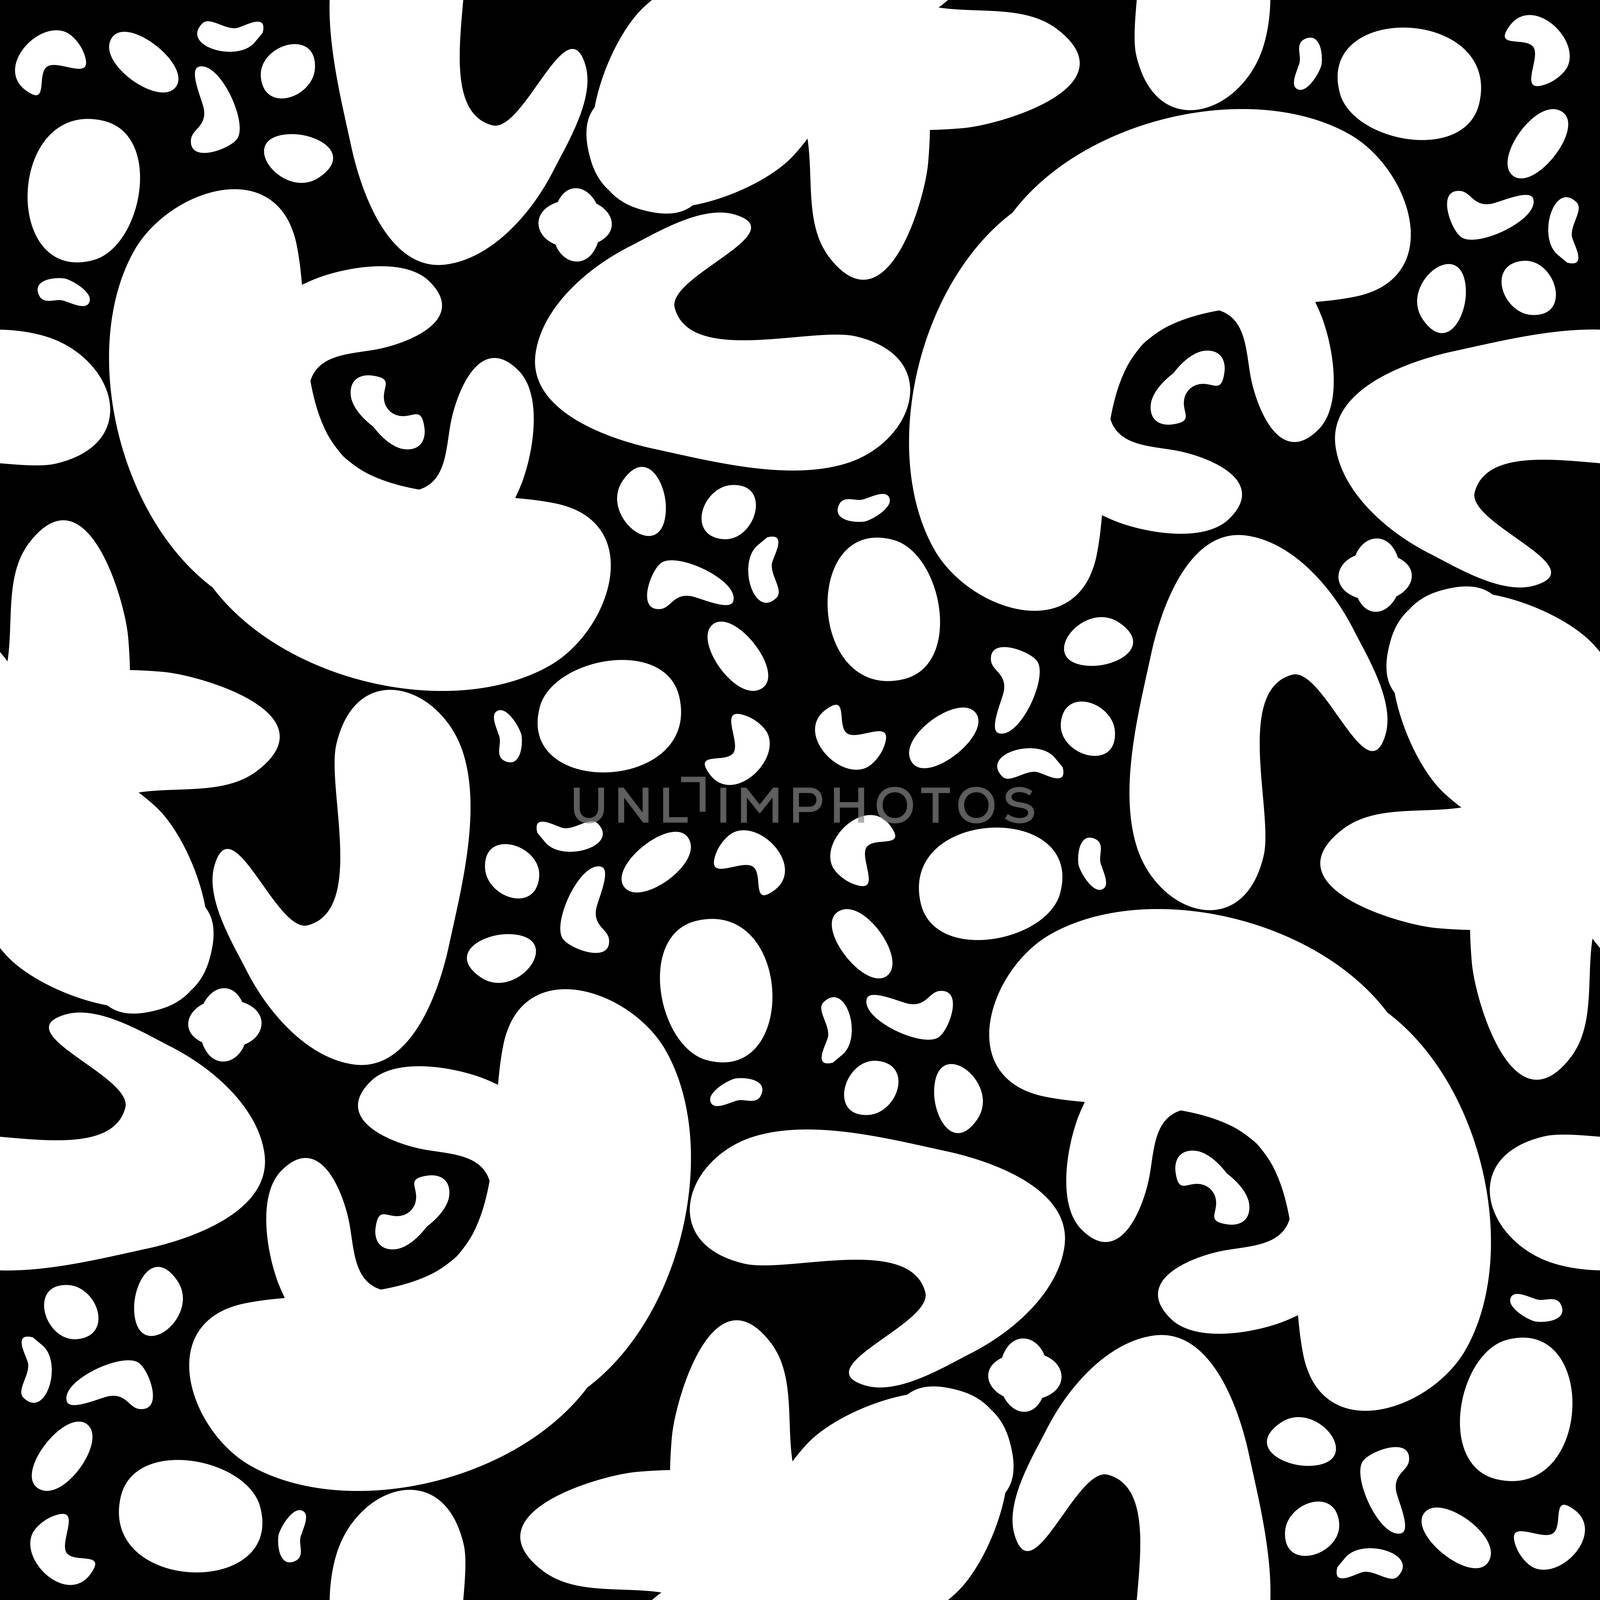 Repeating pattern background of black and white organic shapes